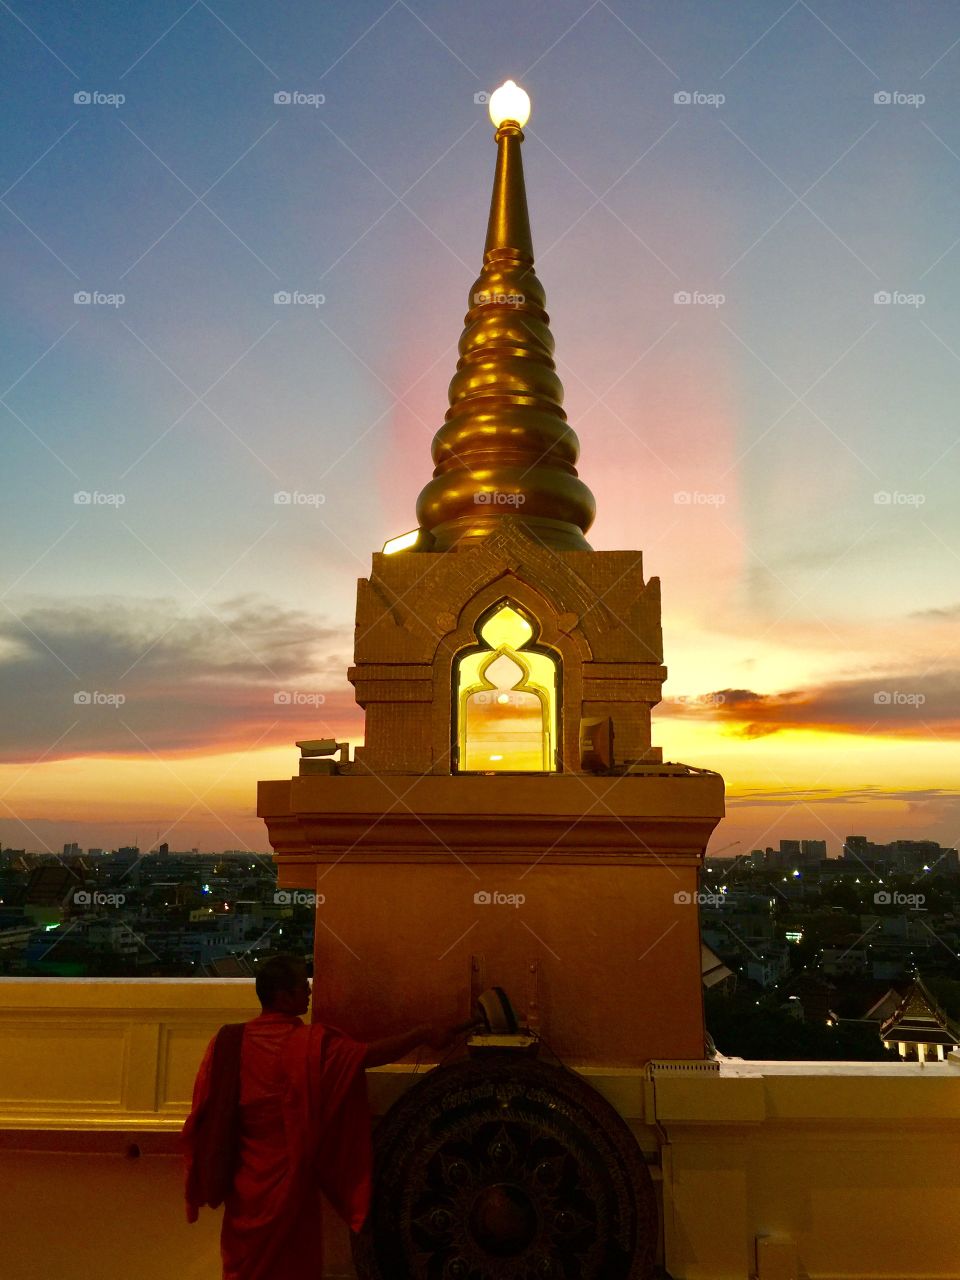 Sunset in a Temple in Bangkok